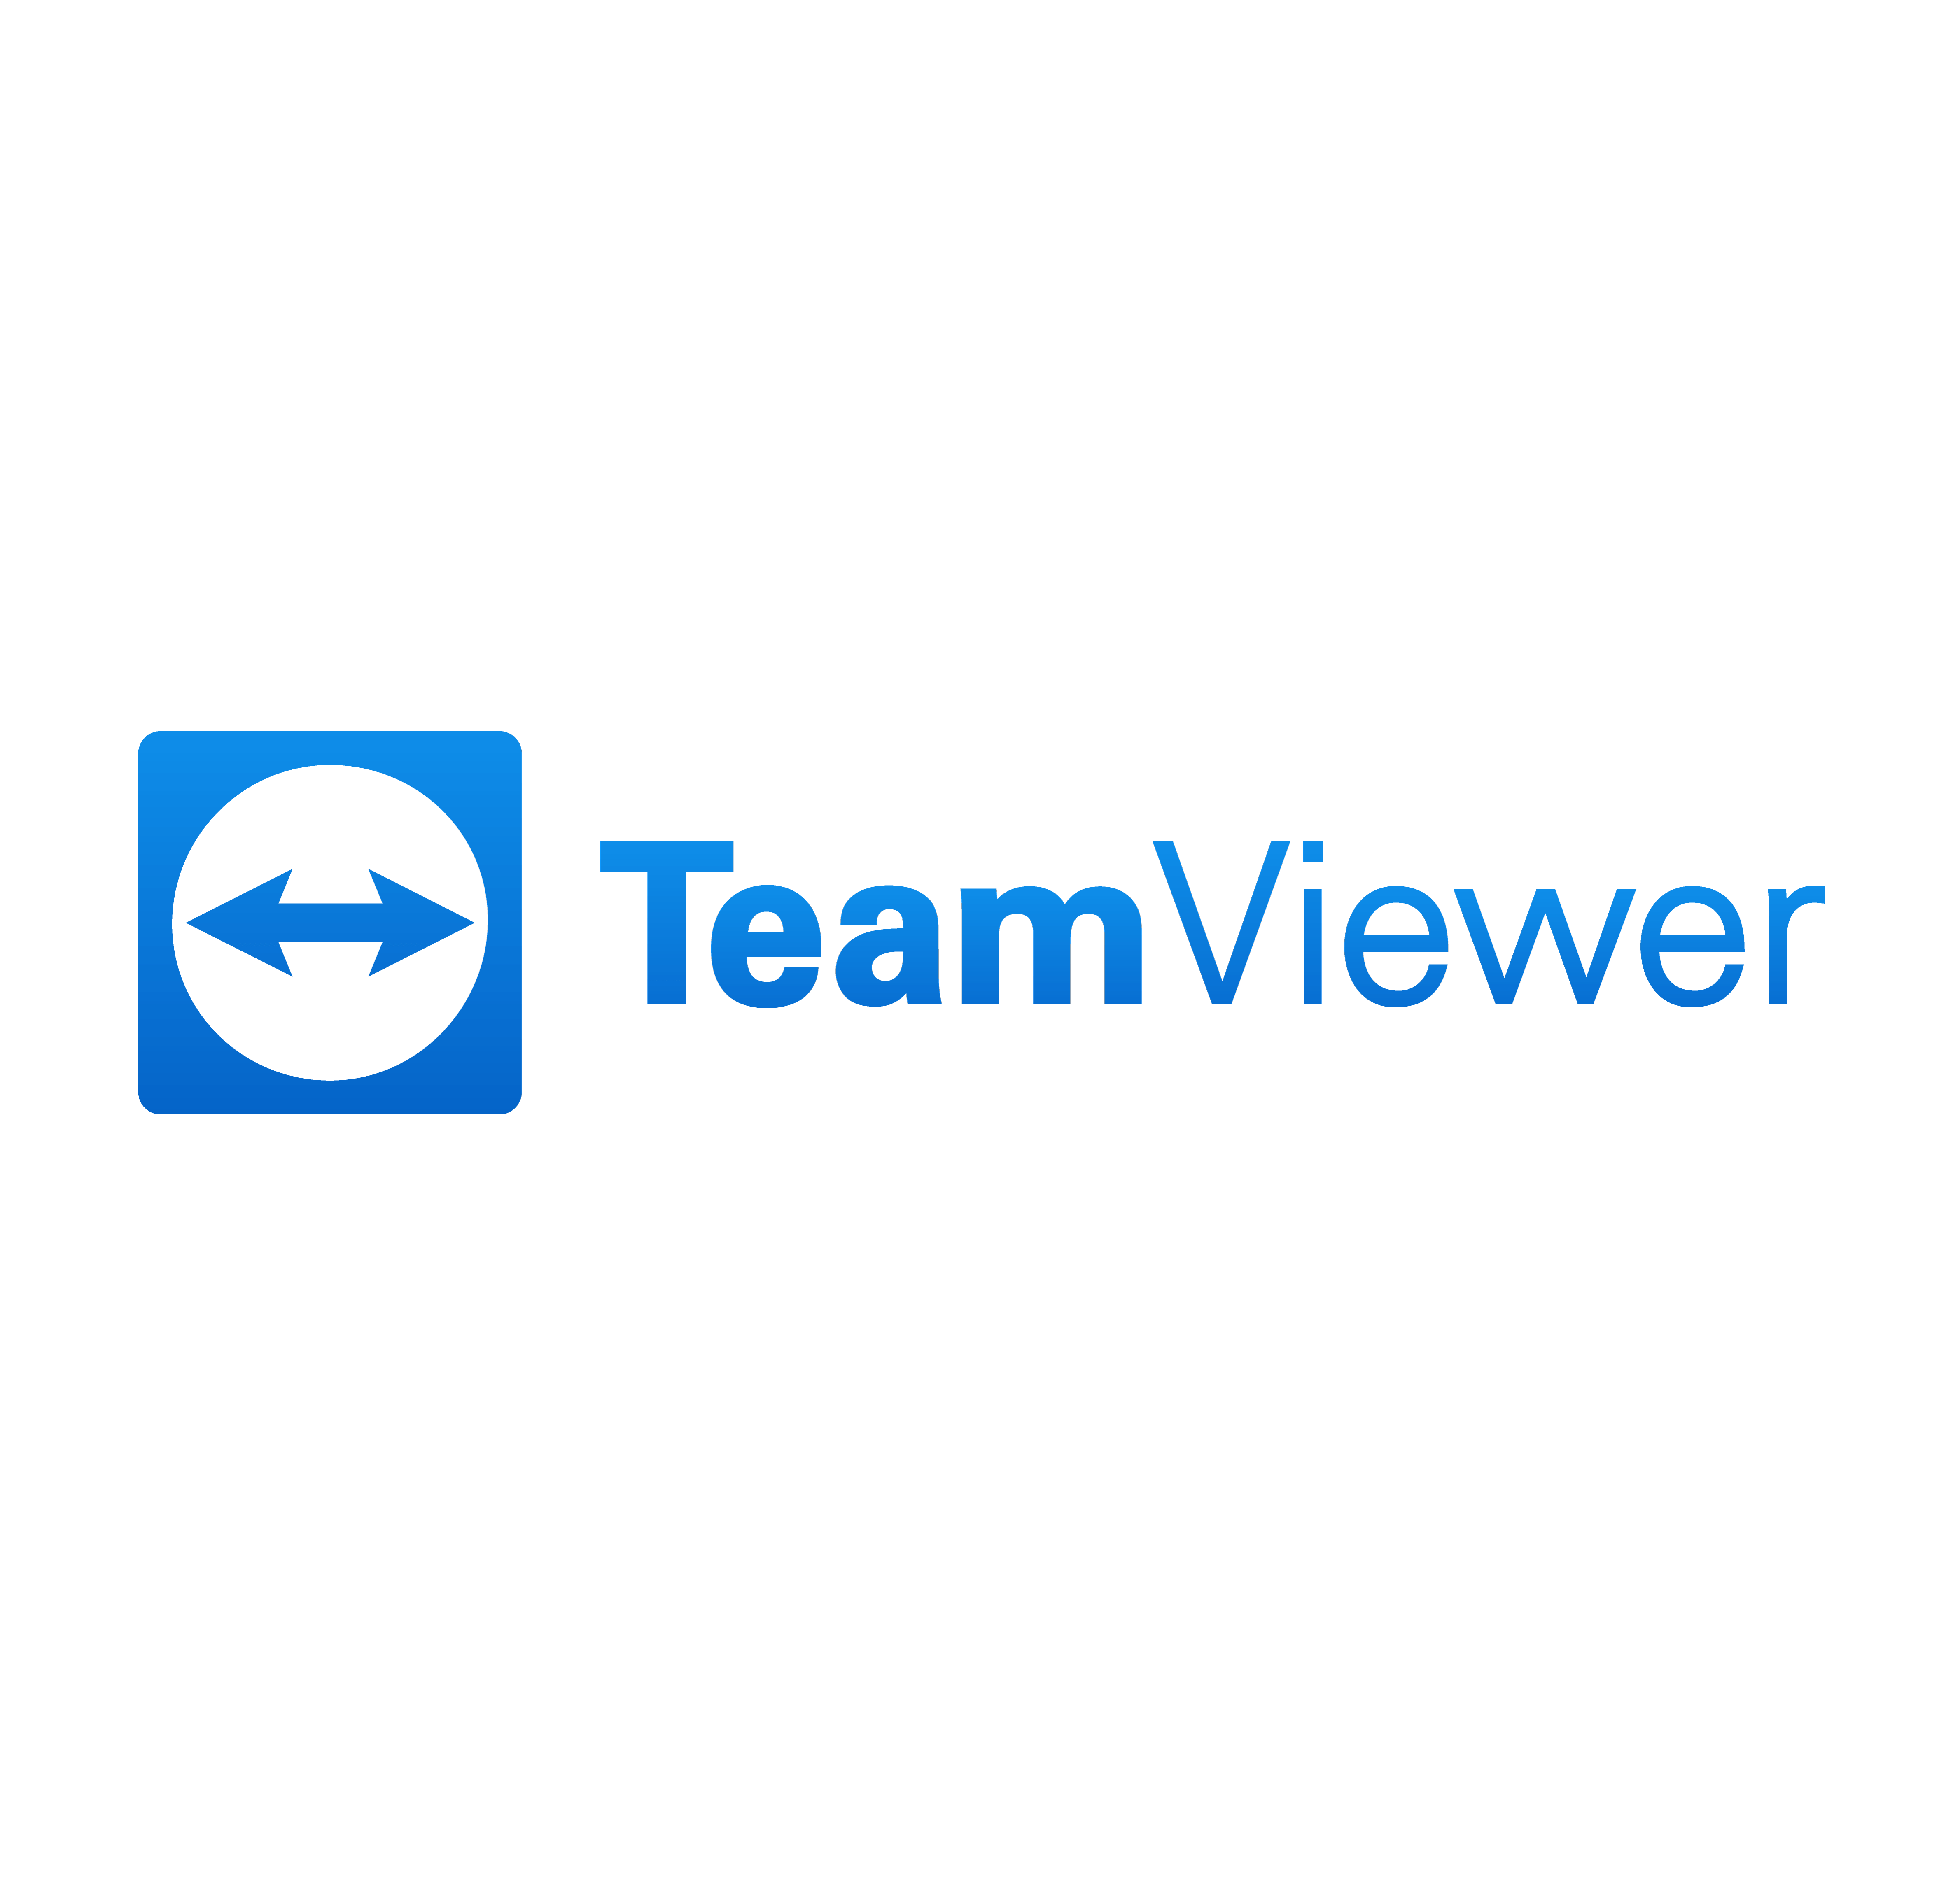 is teamviewer free for personal use